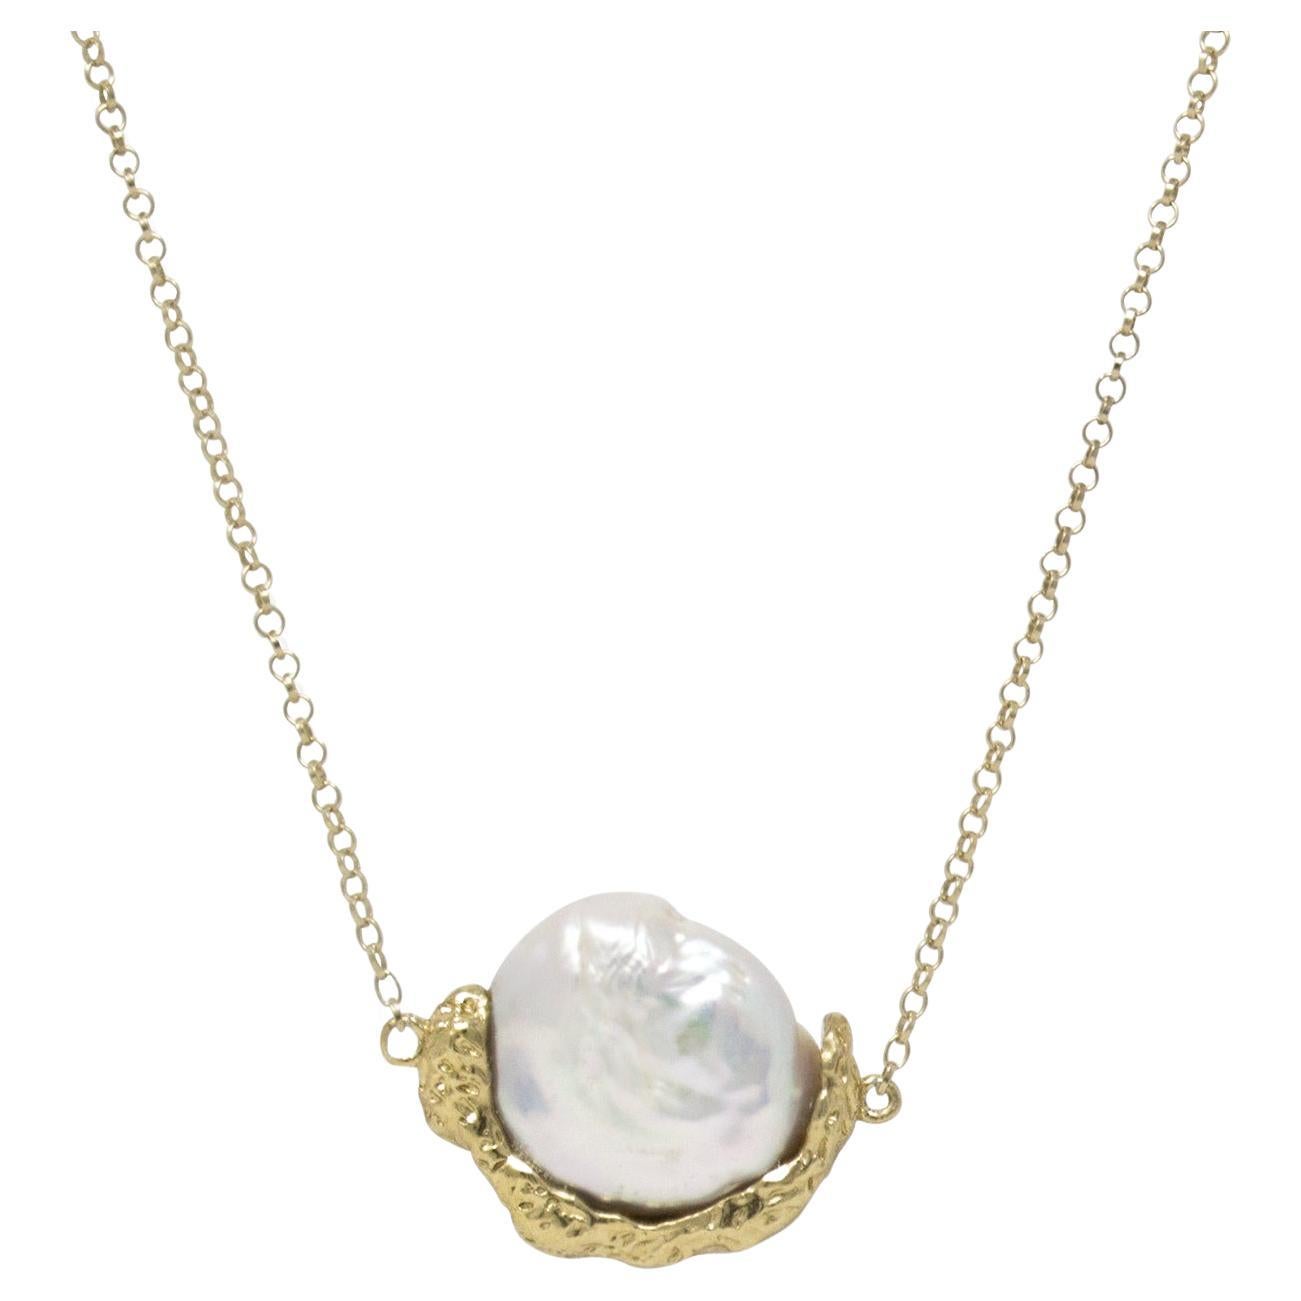 Ad Astra Gold-plated Pearl Necklace